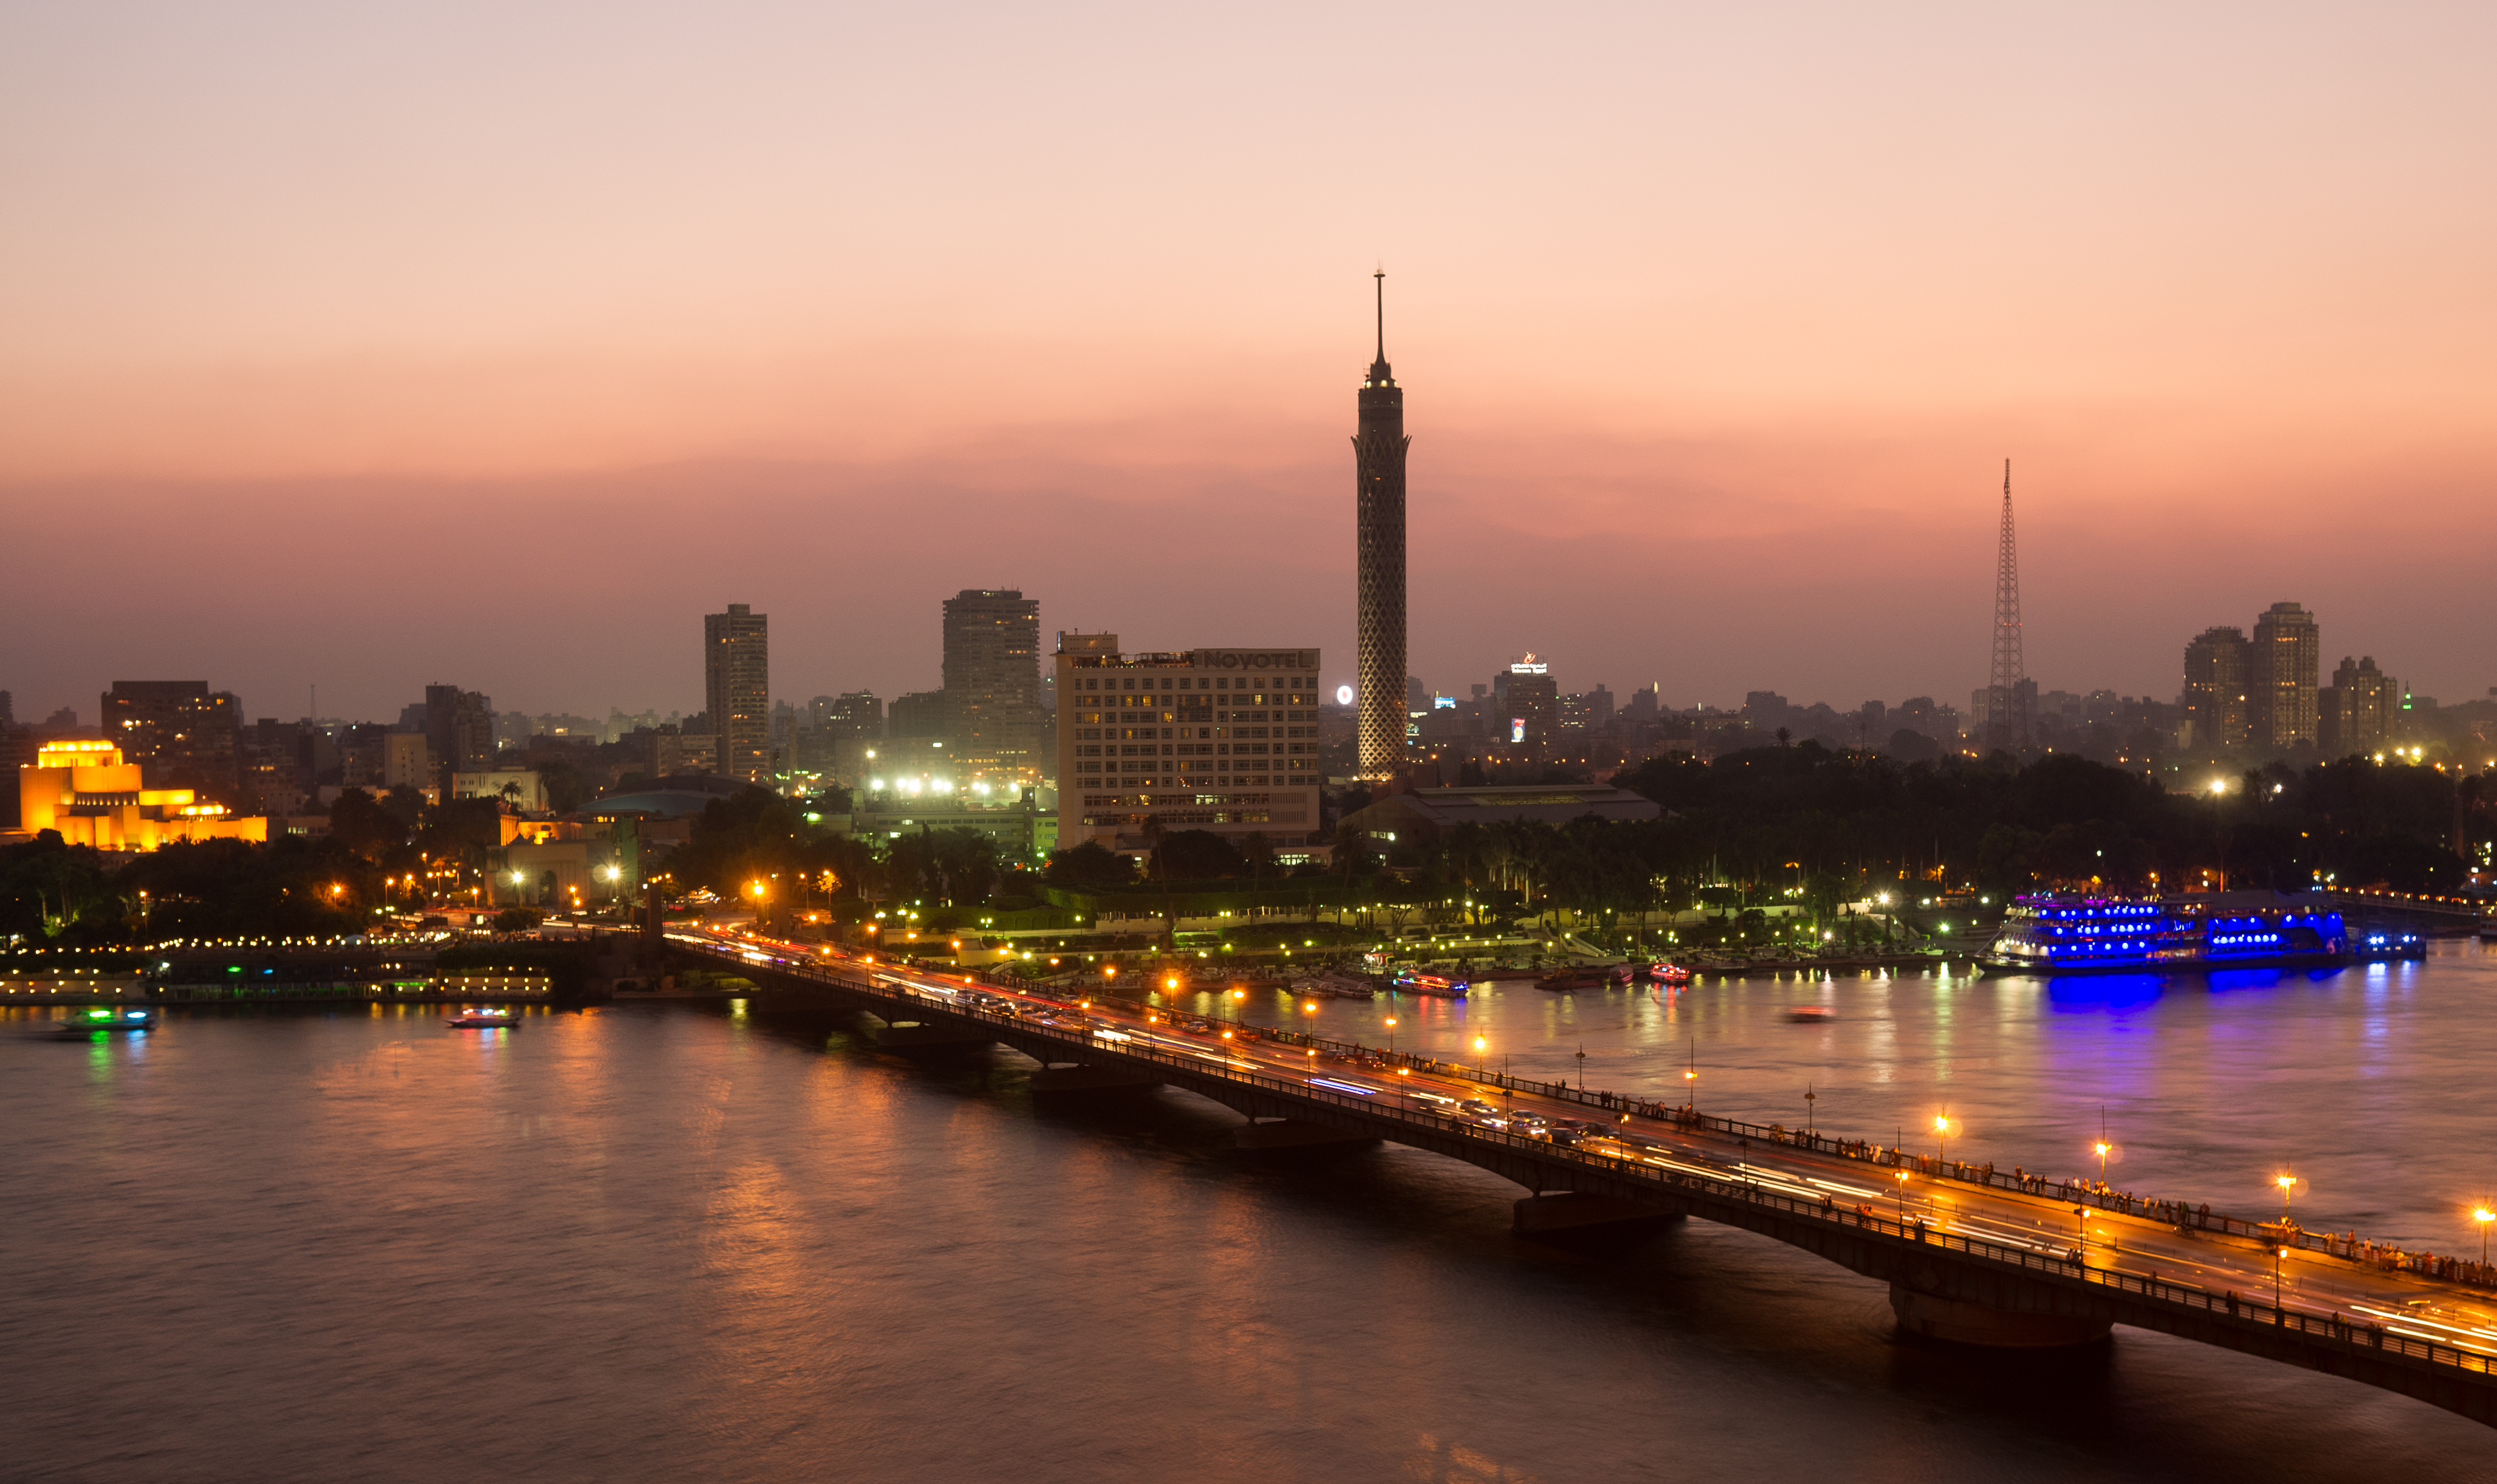 Travel Package: Oases Adventure Safari and Ancient Egypt Sightseeing on Nile Cruise